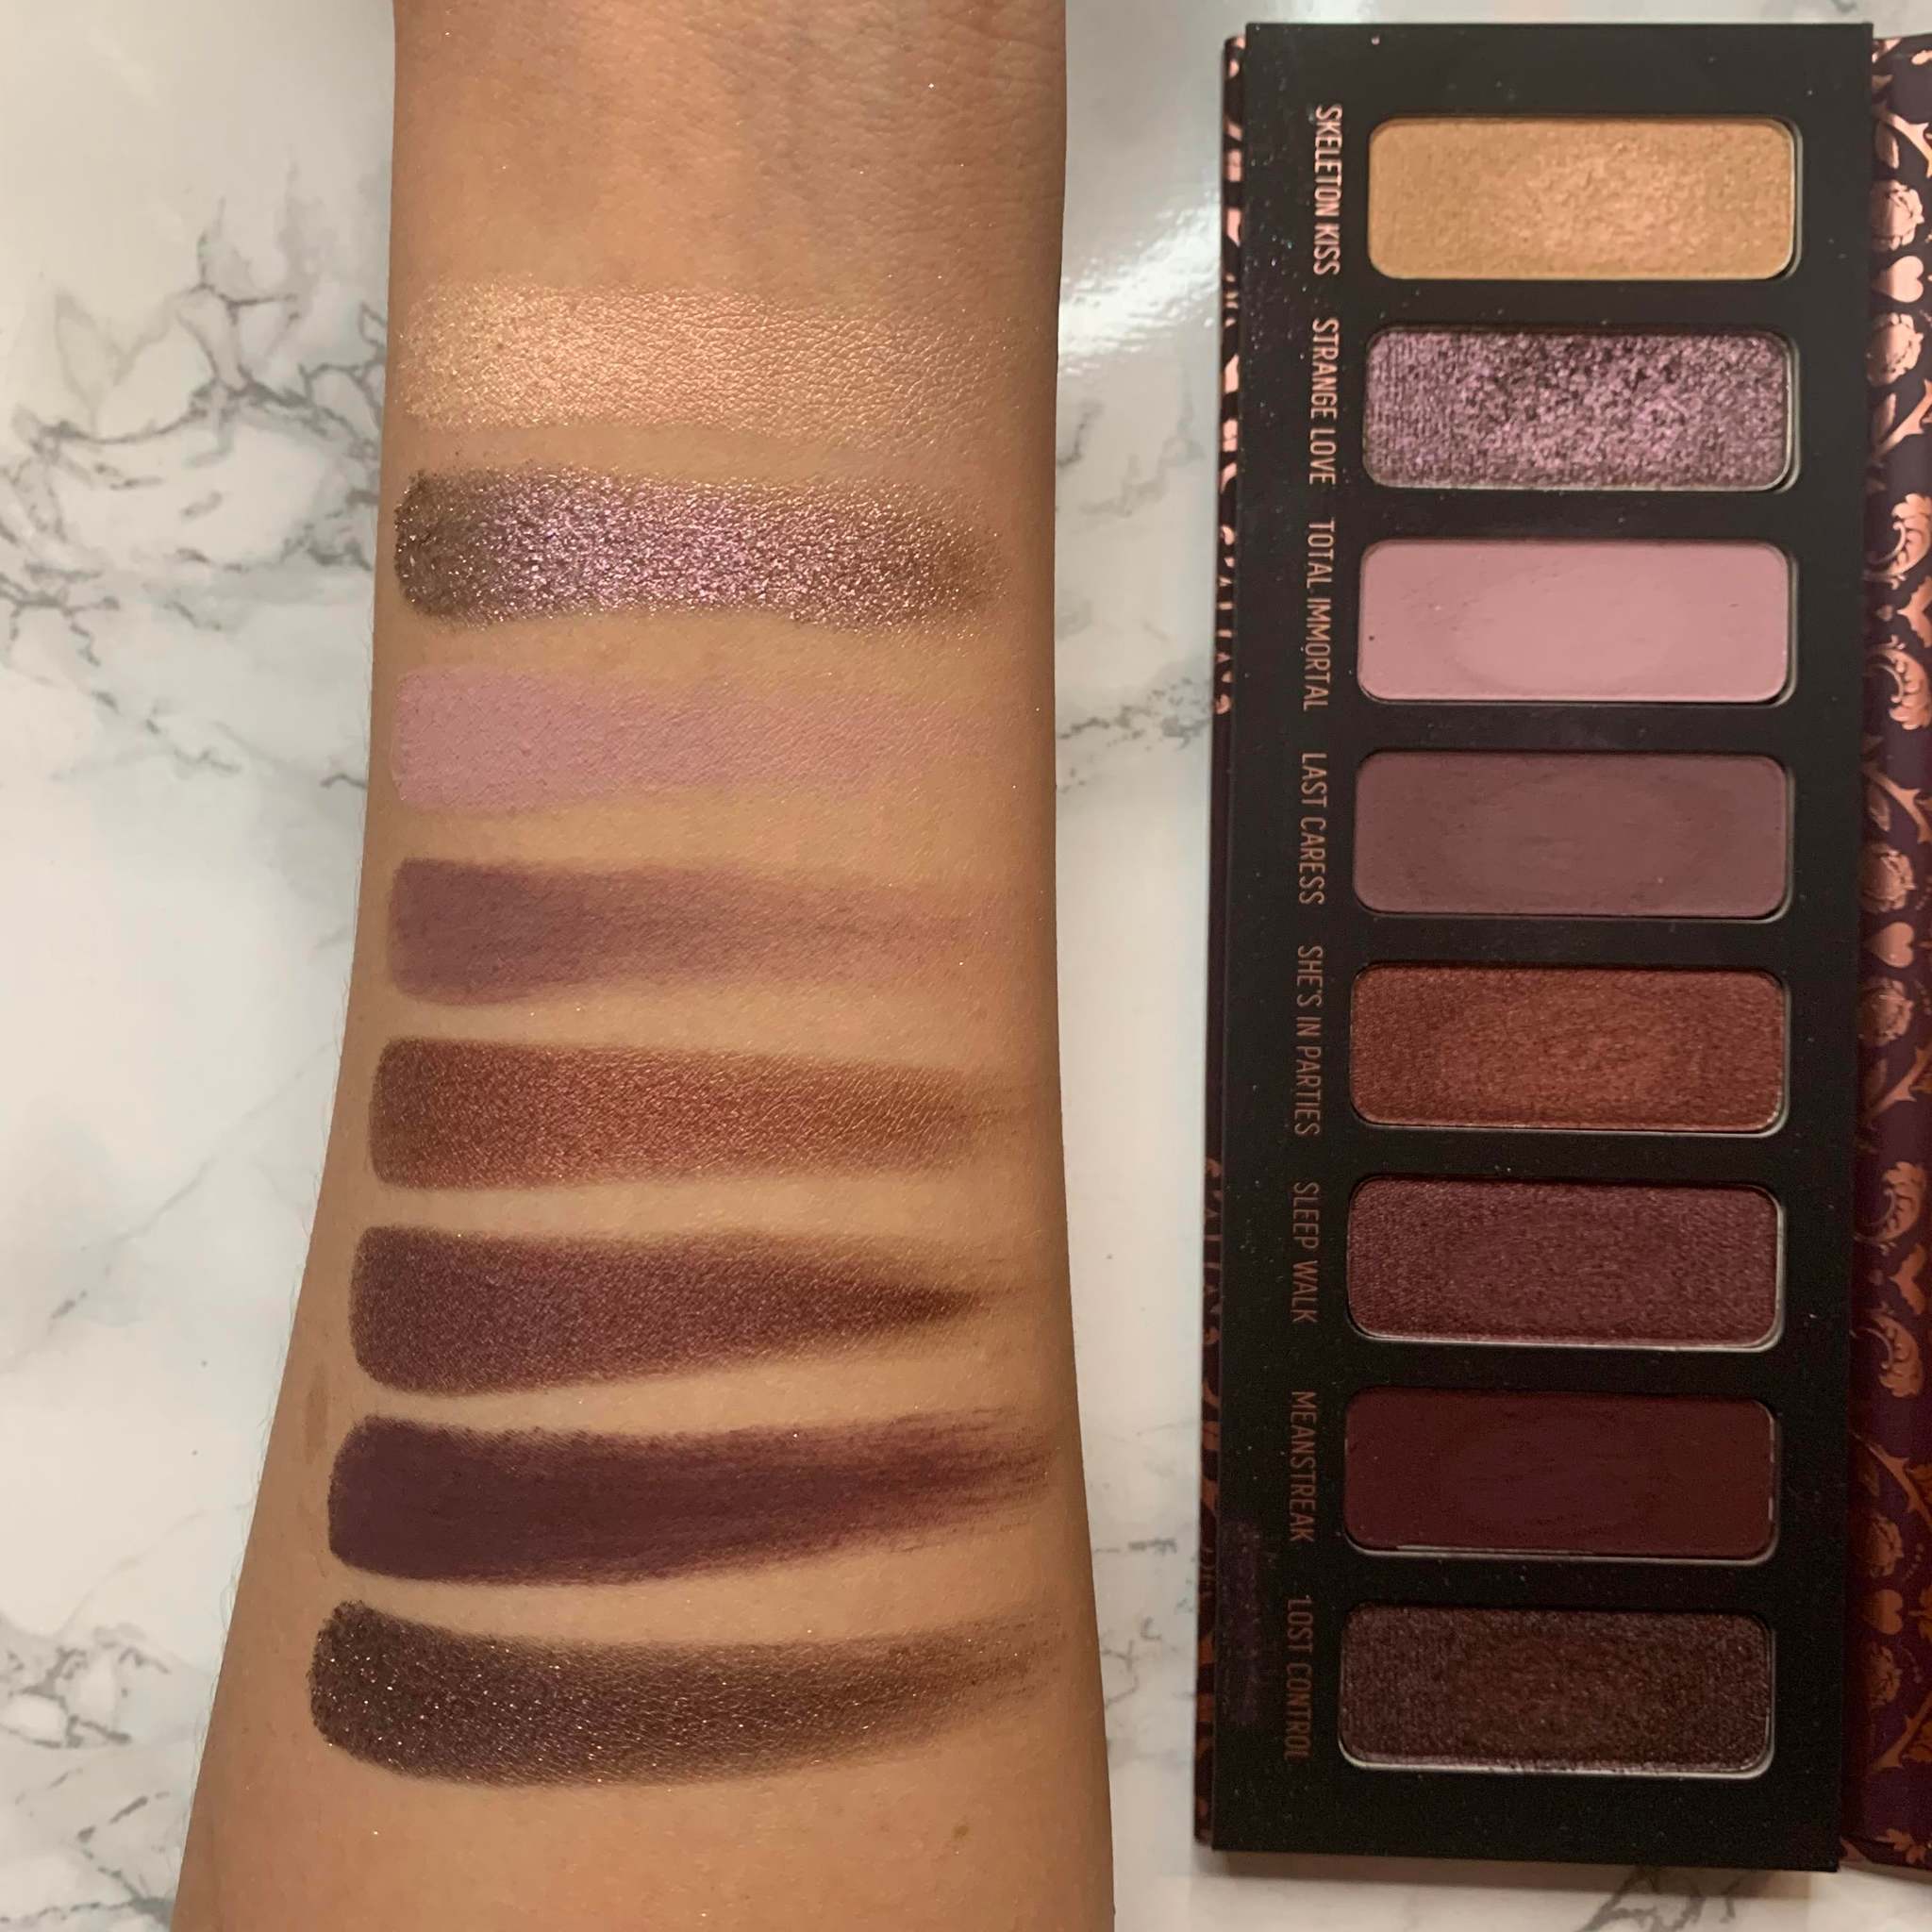 Melt Cosmetics She's in Parties Palette